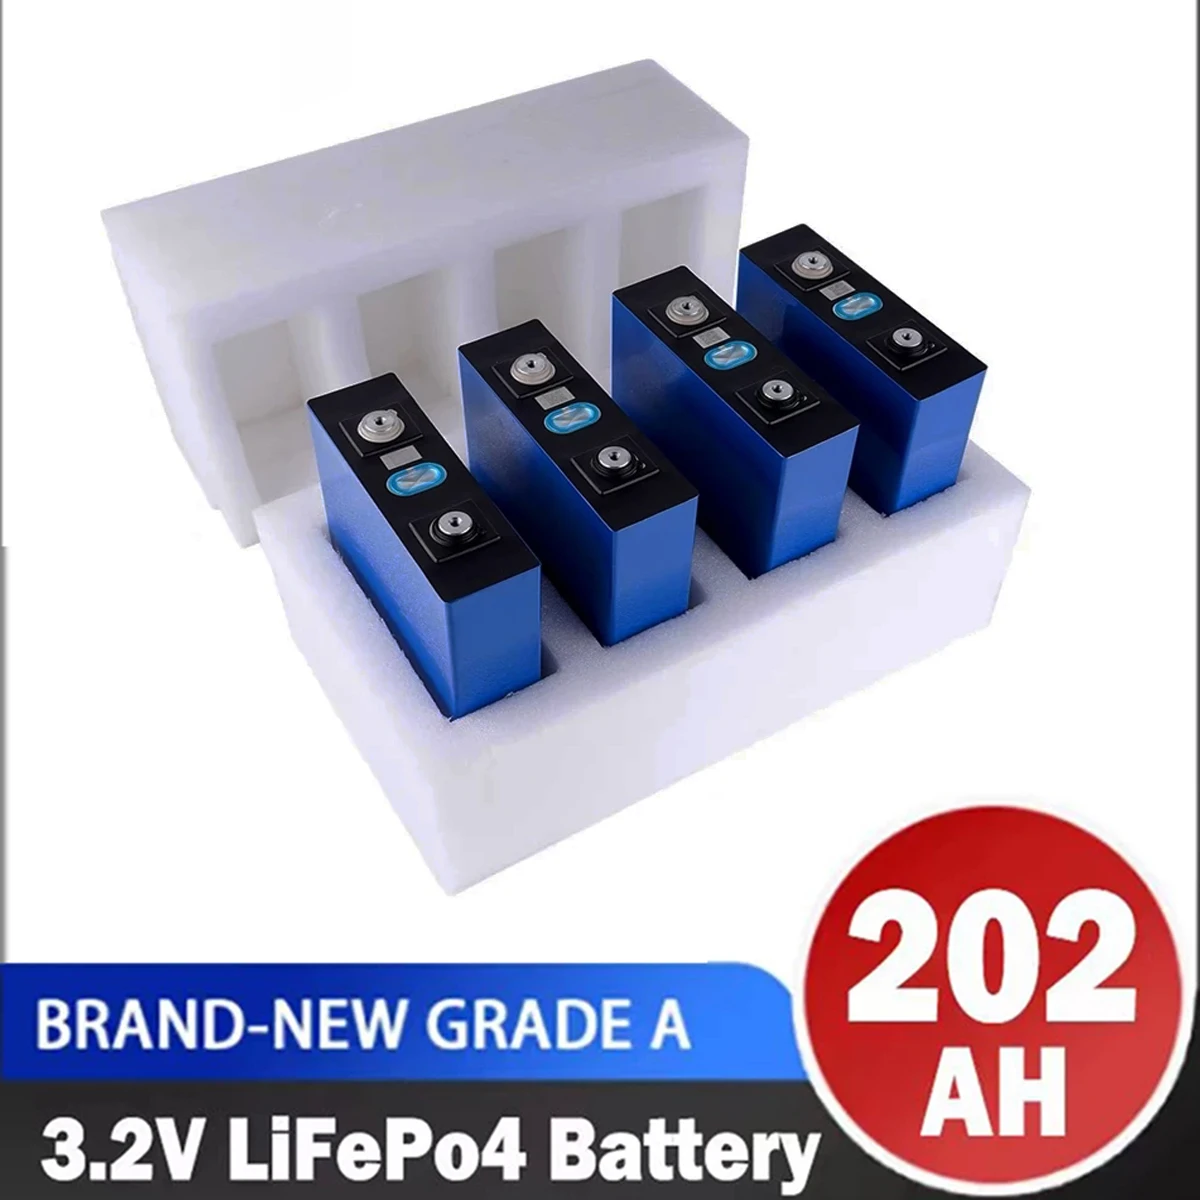 

New 202Ah Lifepo4 Rechargeable Battery Pack 3.2V Grade A Lithium Iron Phosphate Prismatic New Solar EU US TAX FREE Lifepo4